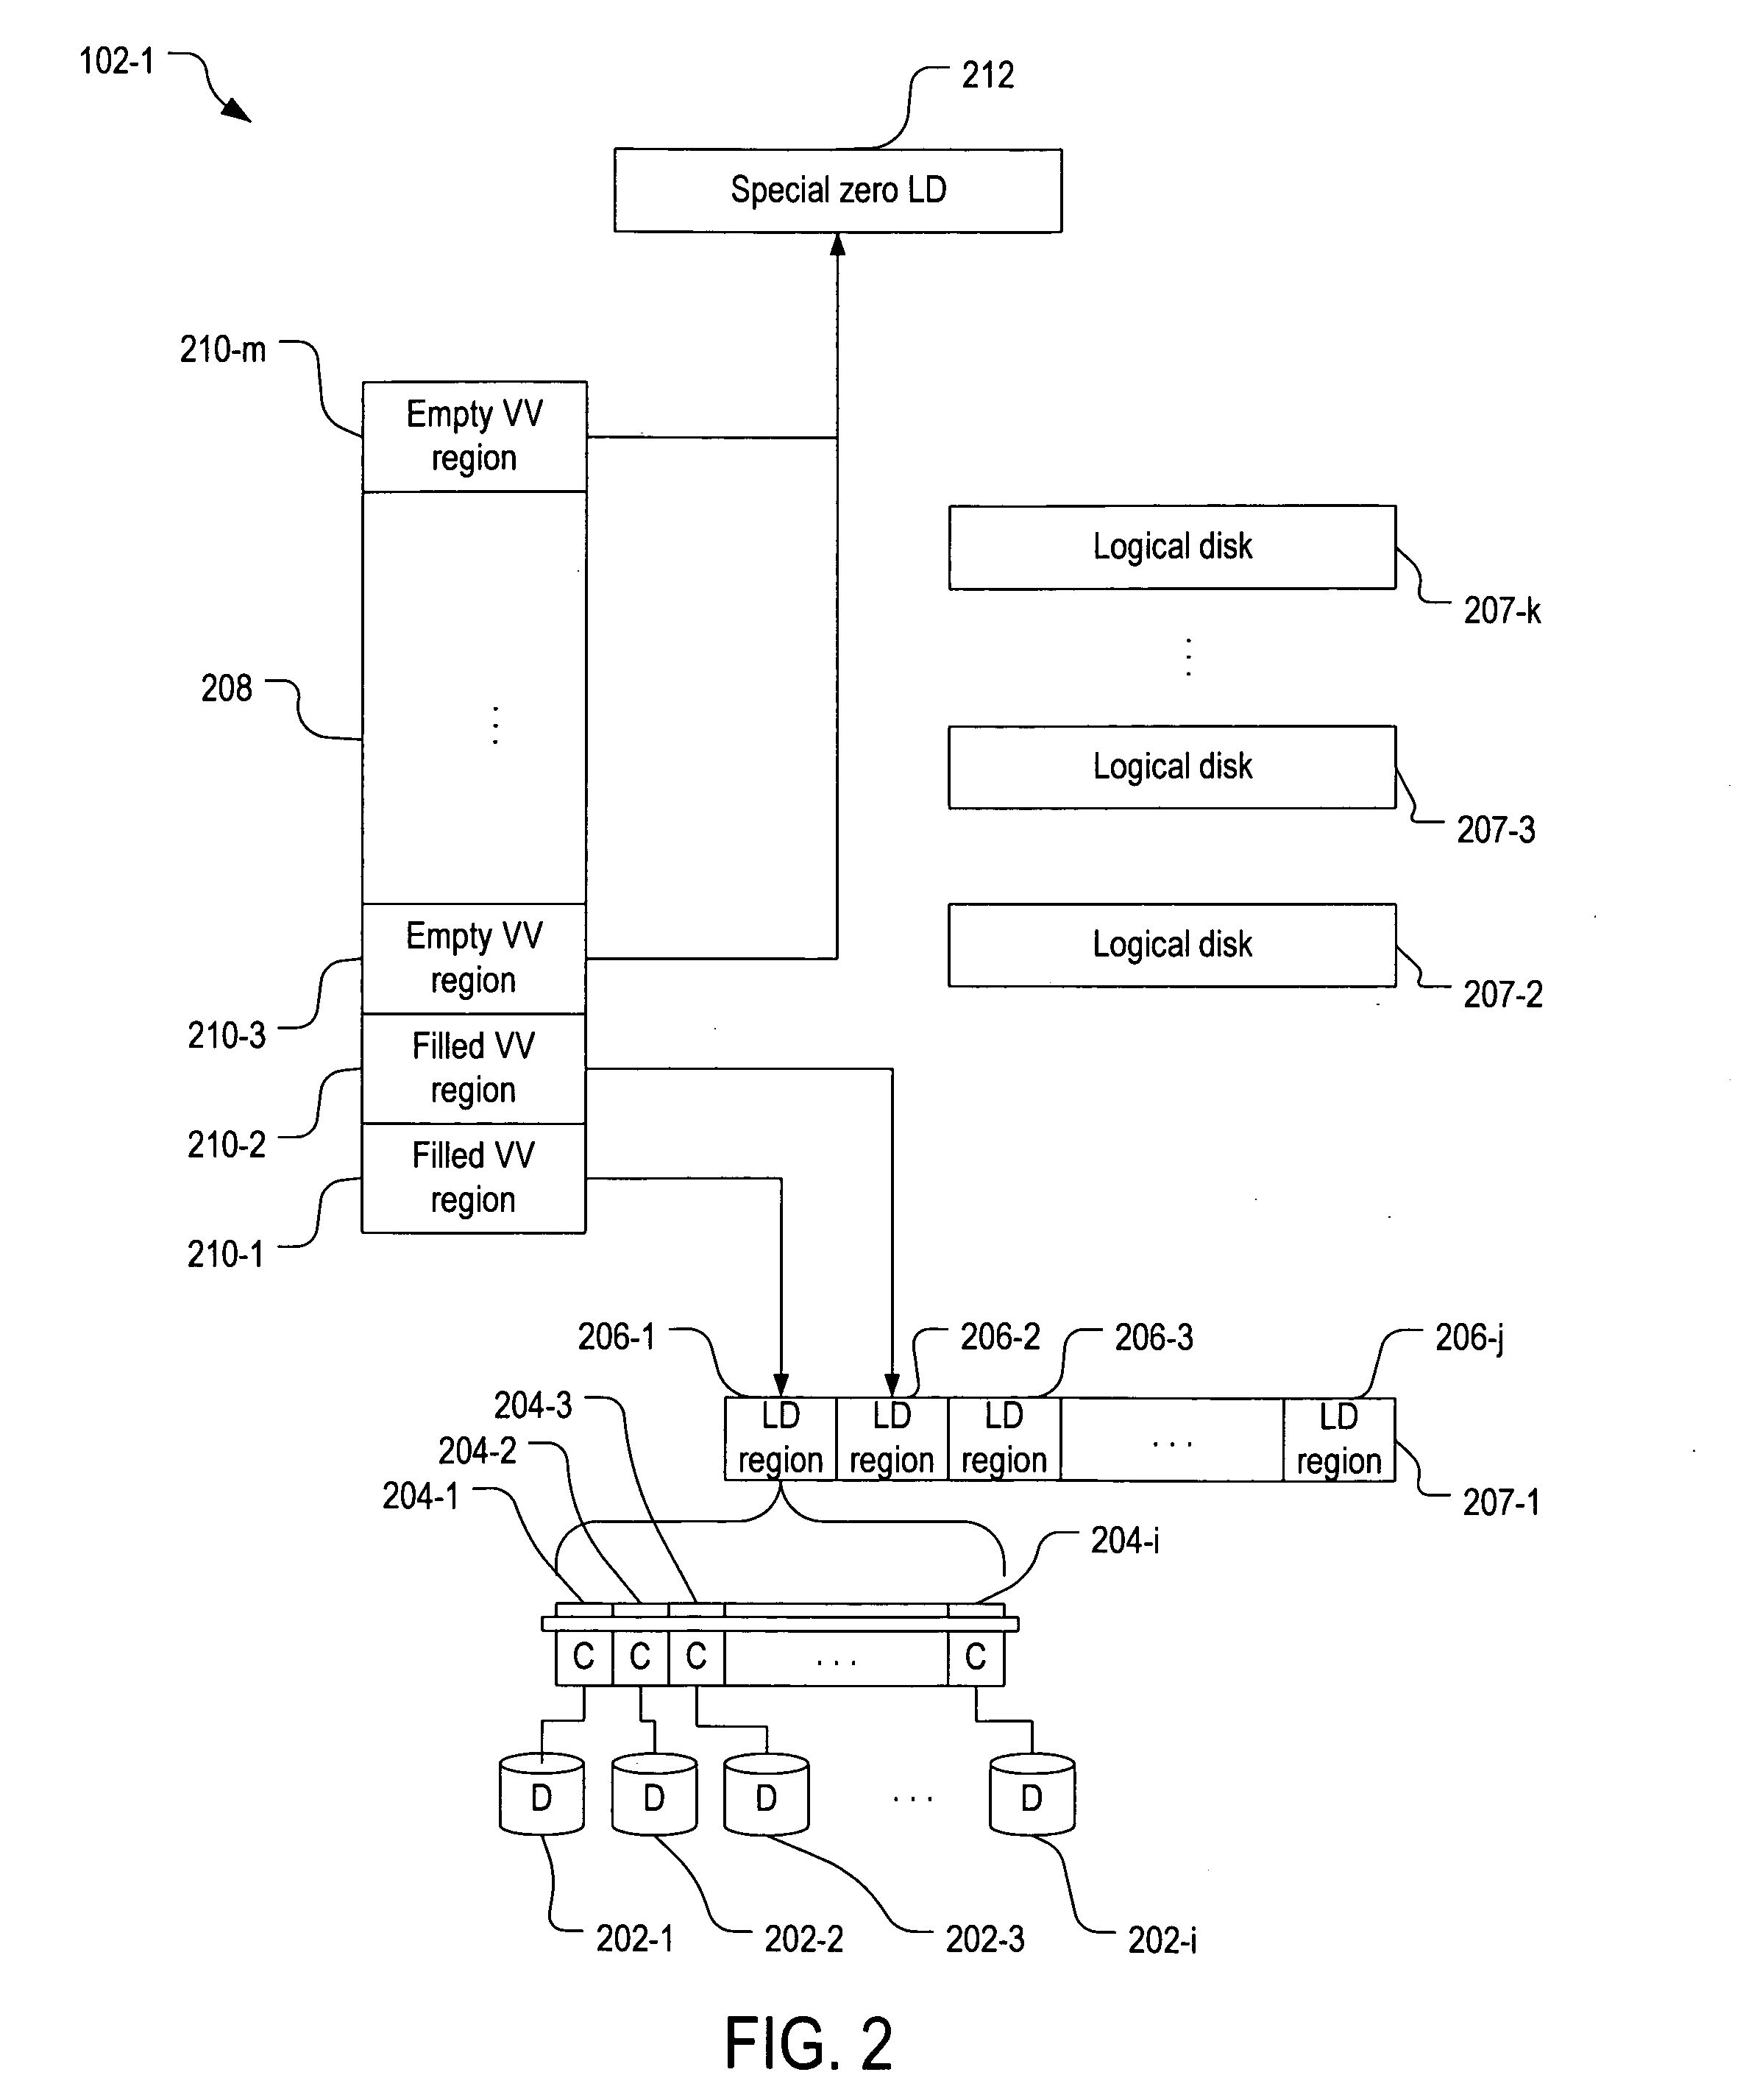 On-demand allocation of physical storage for virtual volumes using a zero logical disk